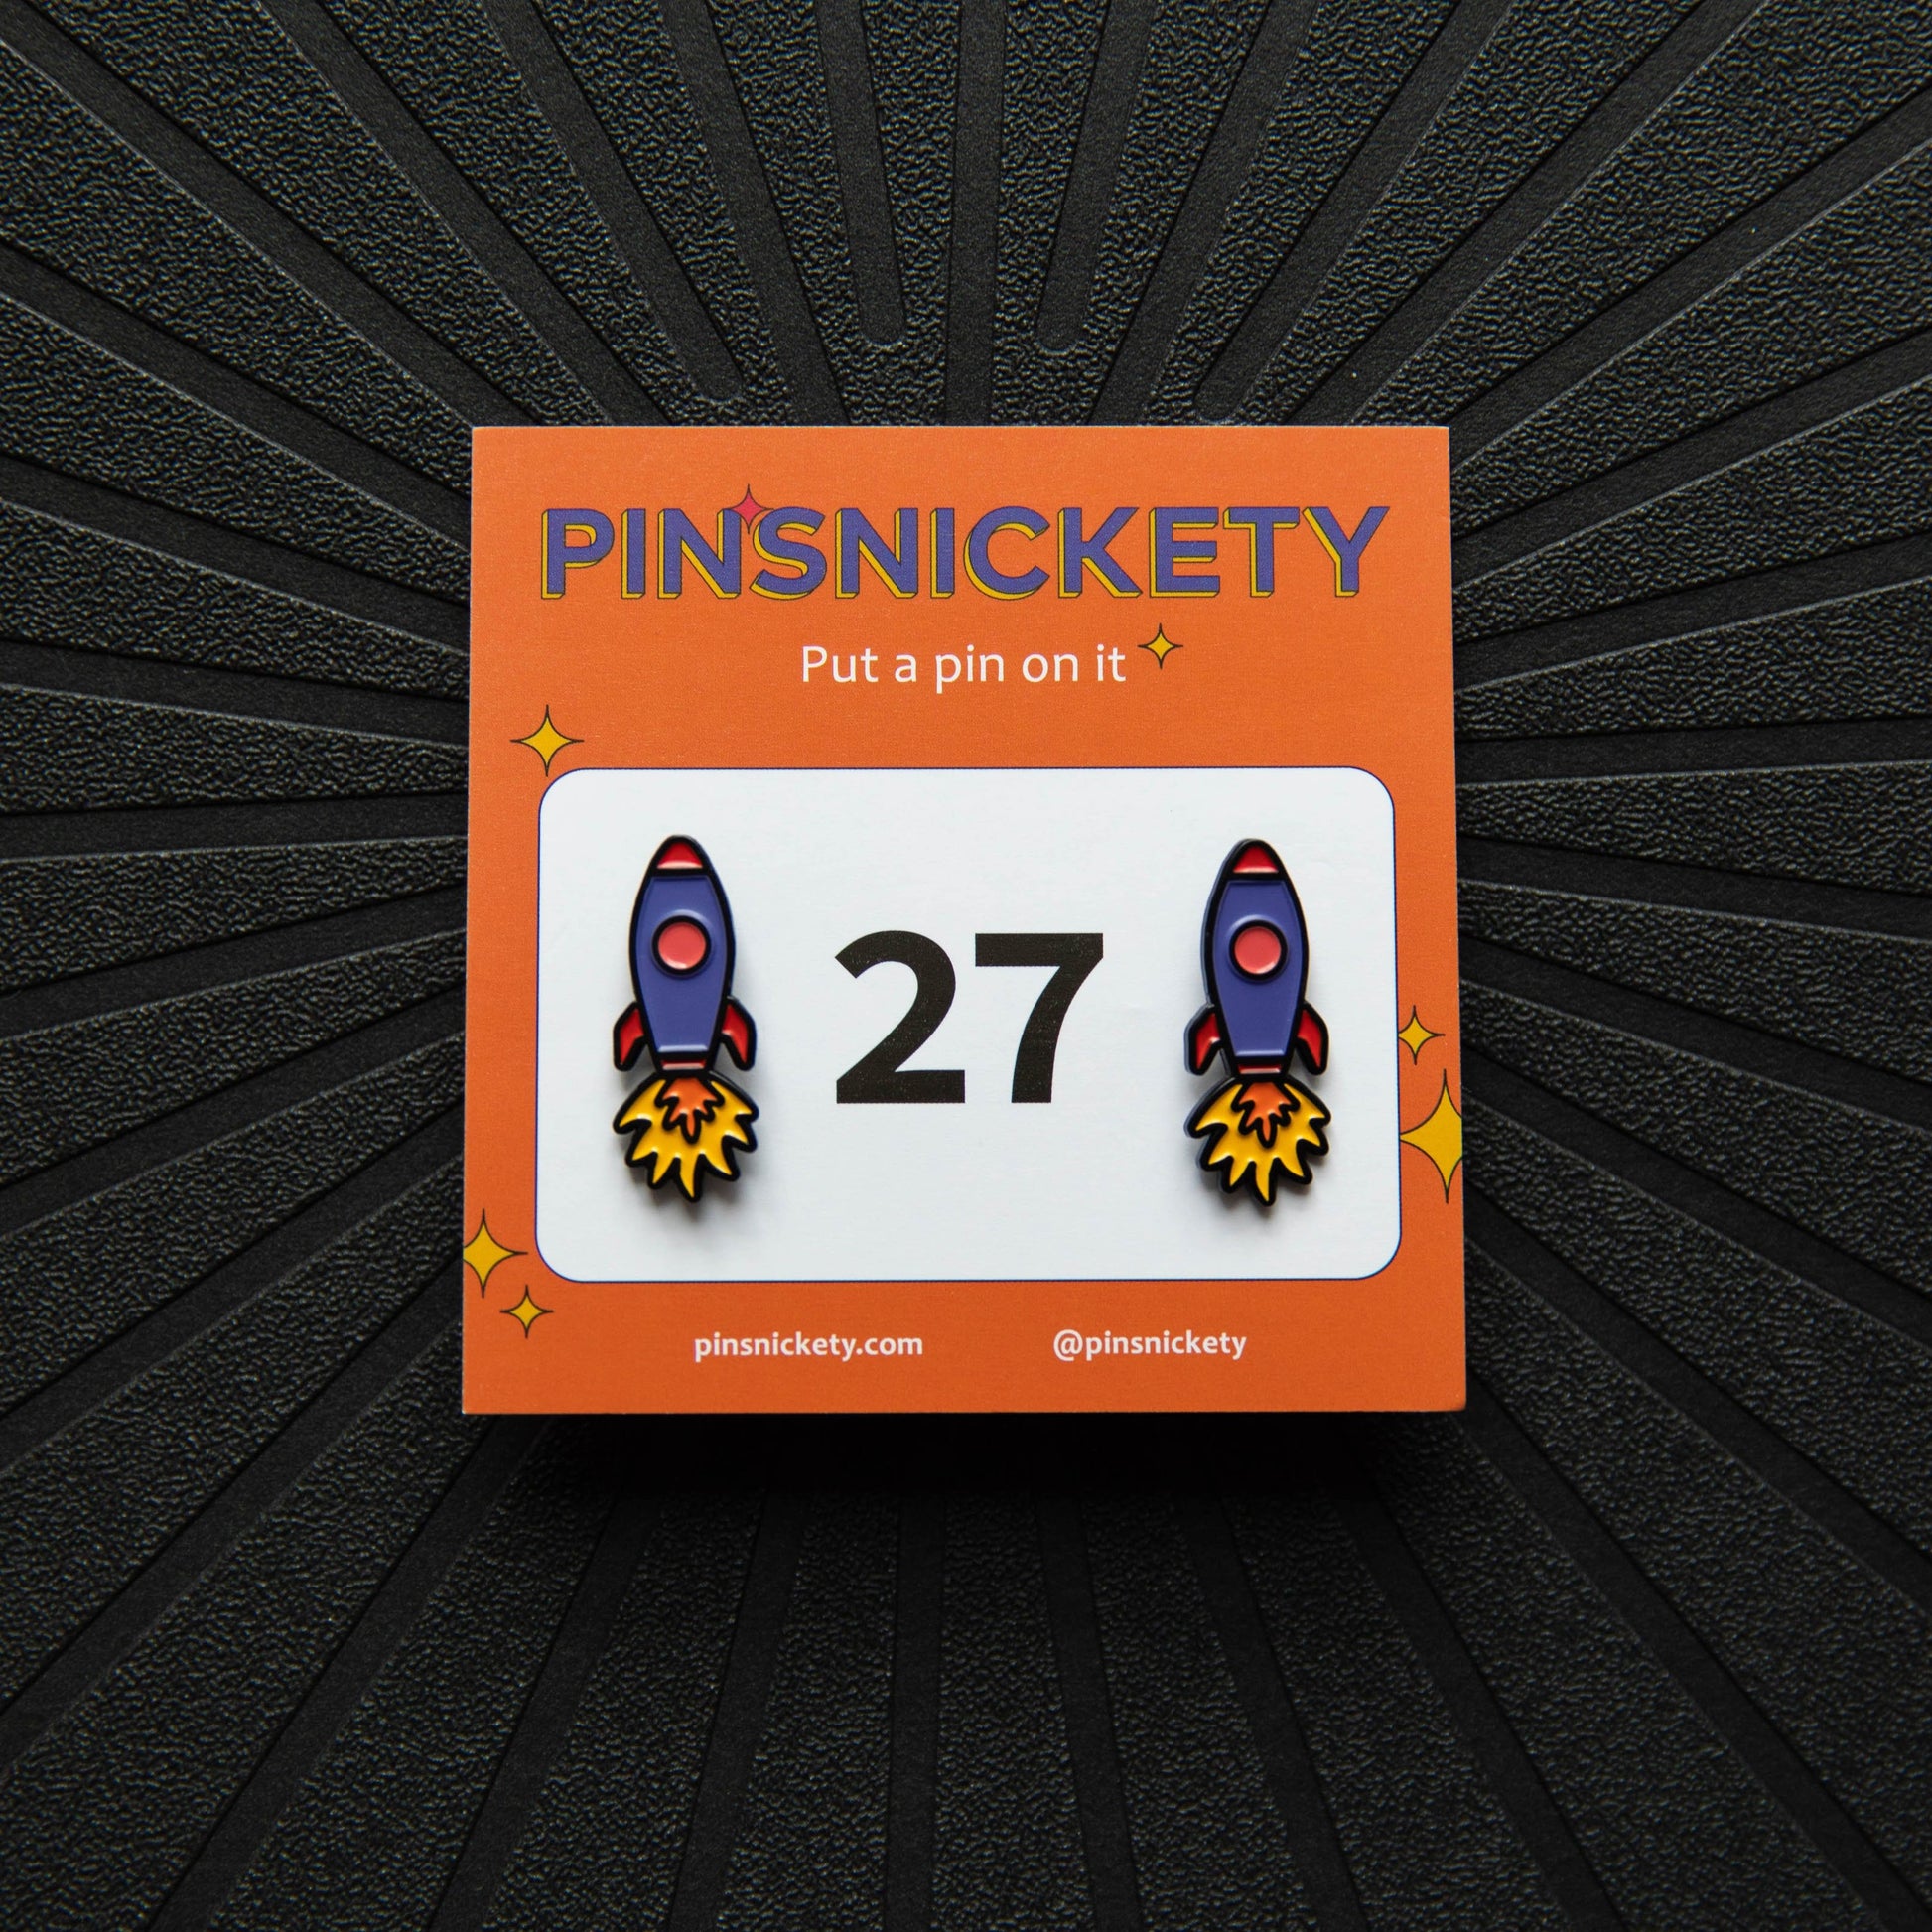 Pinsnickety Rocket Ship horse show number pins with their product packaging card